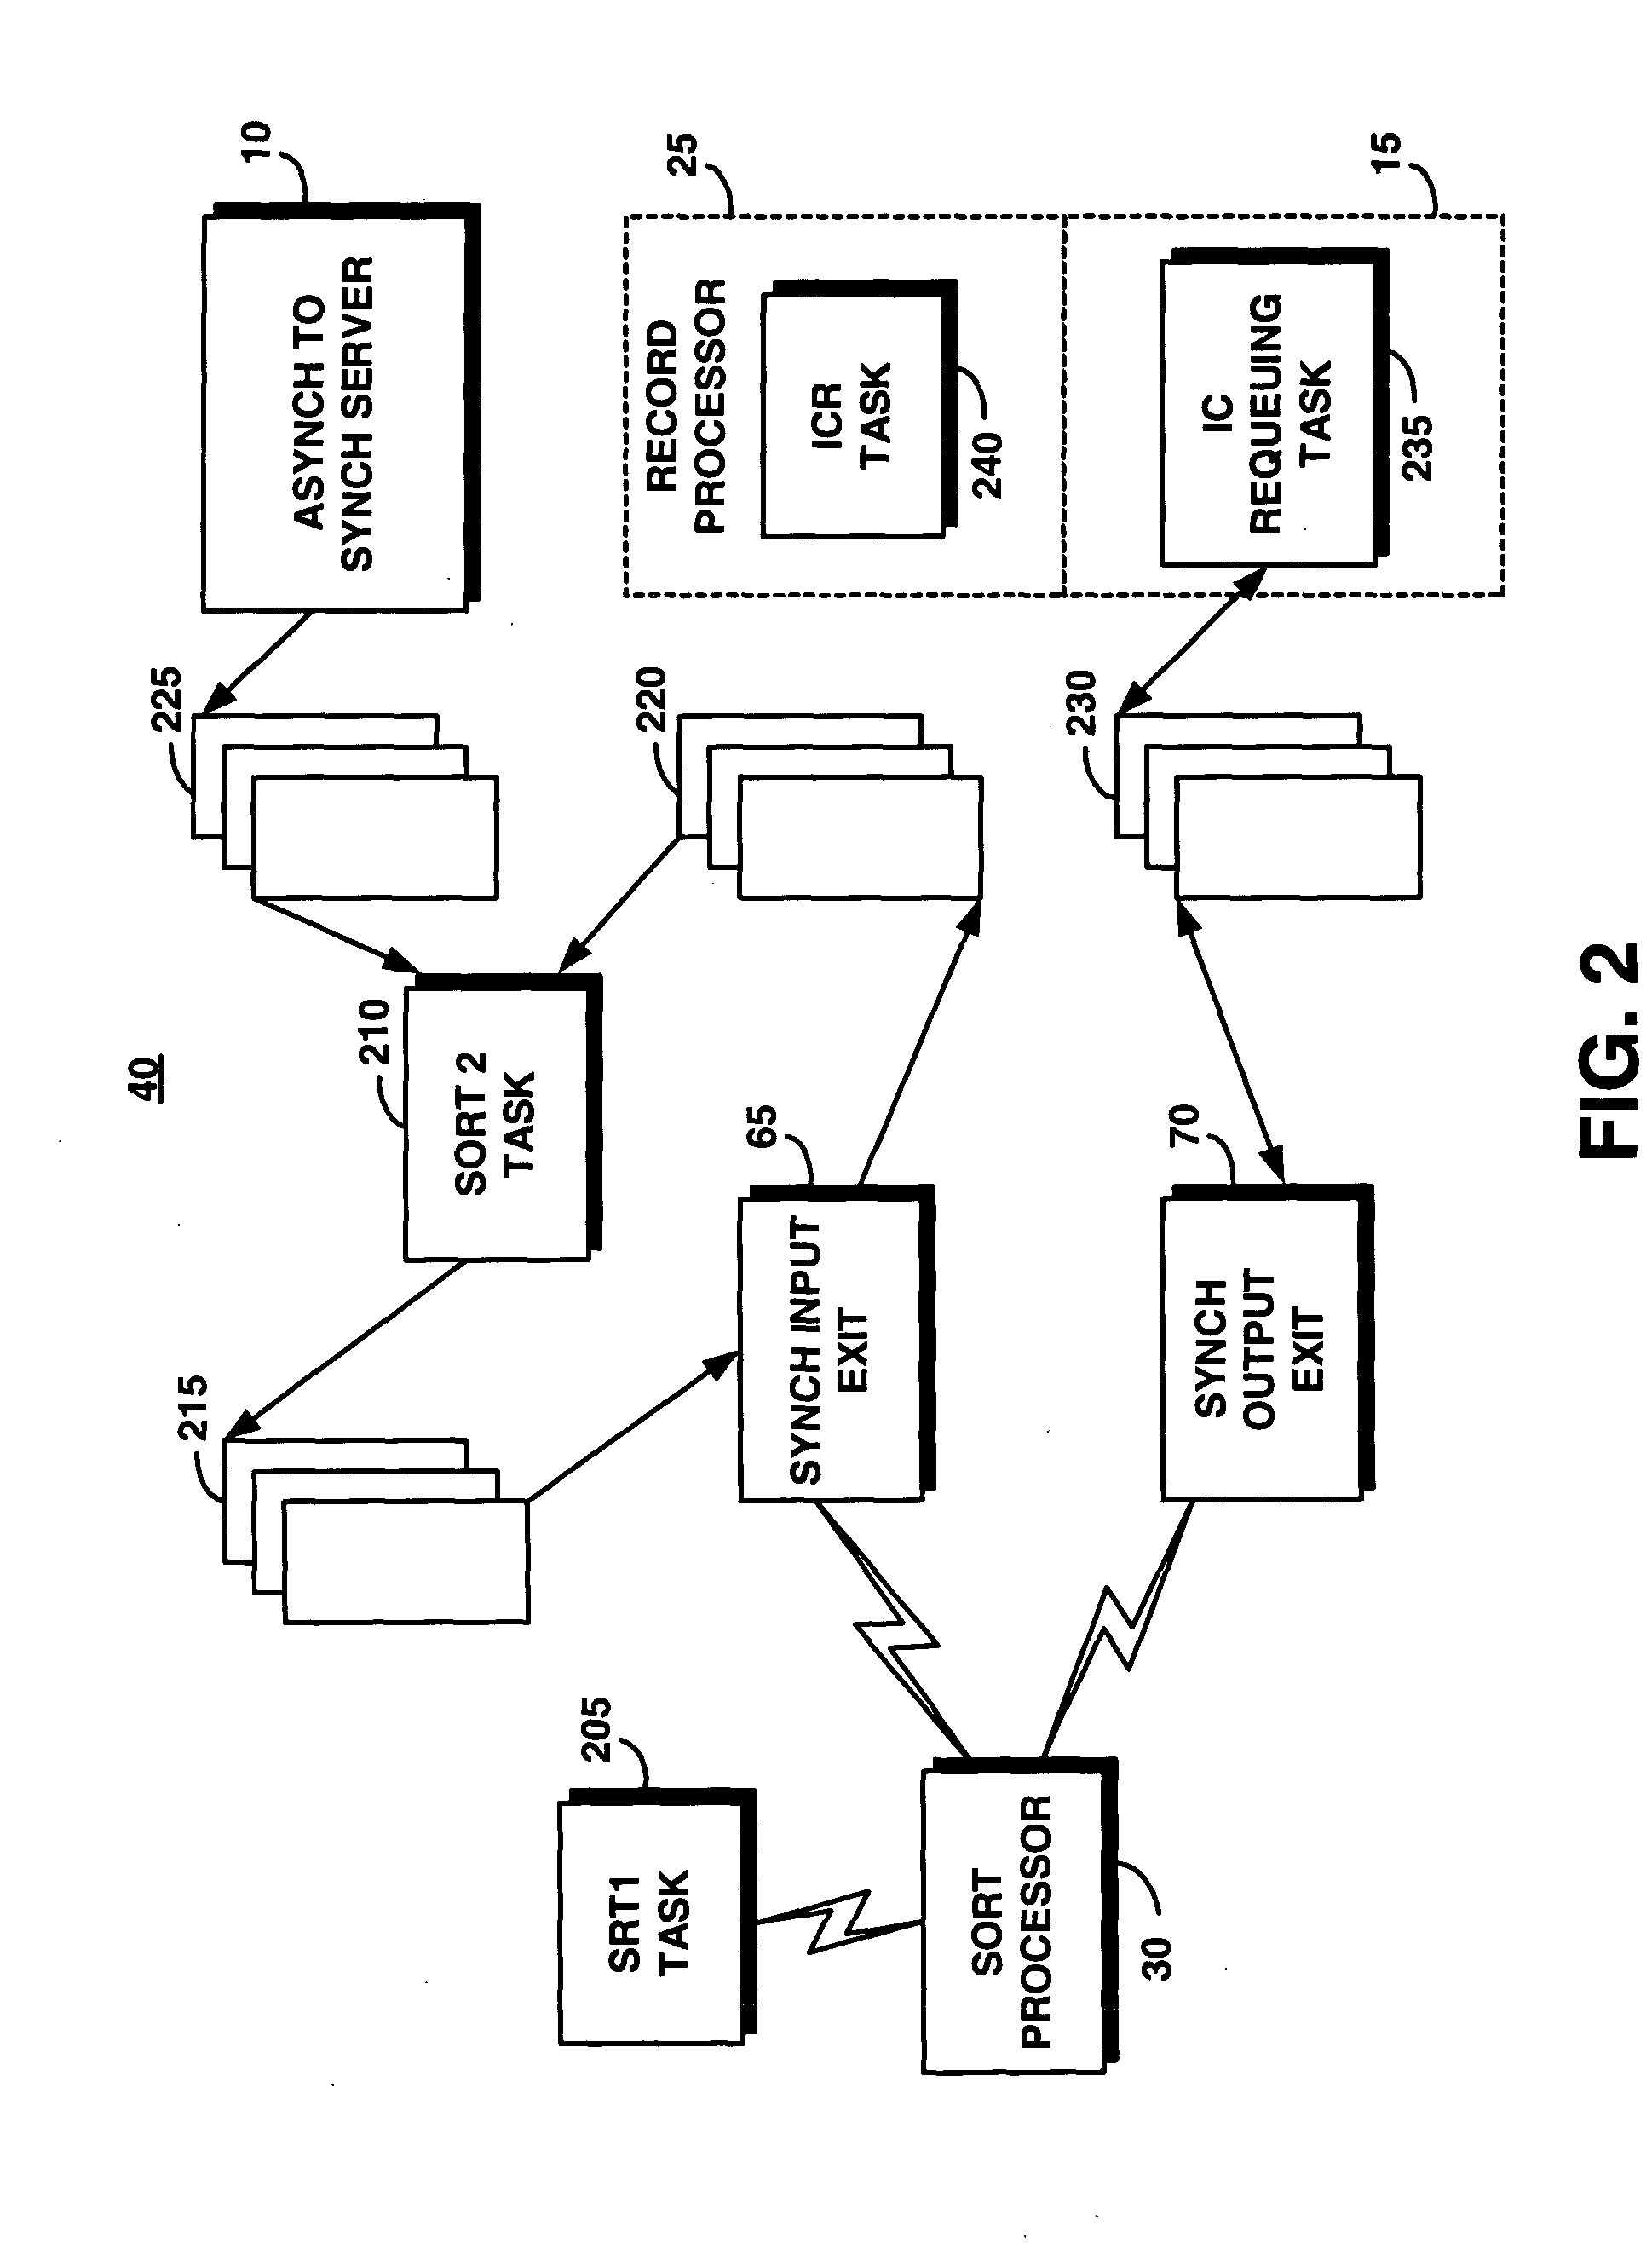 System and method for facilitating data flow between synchronous and asynchronous processes